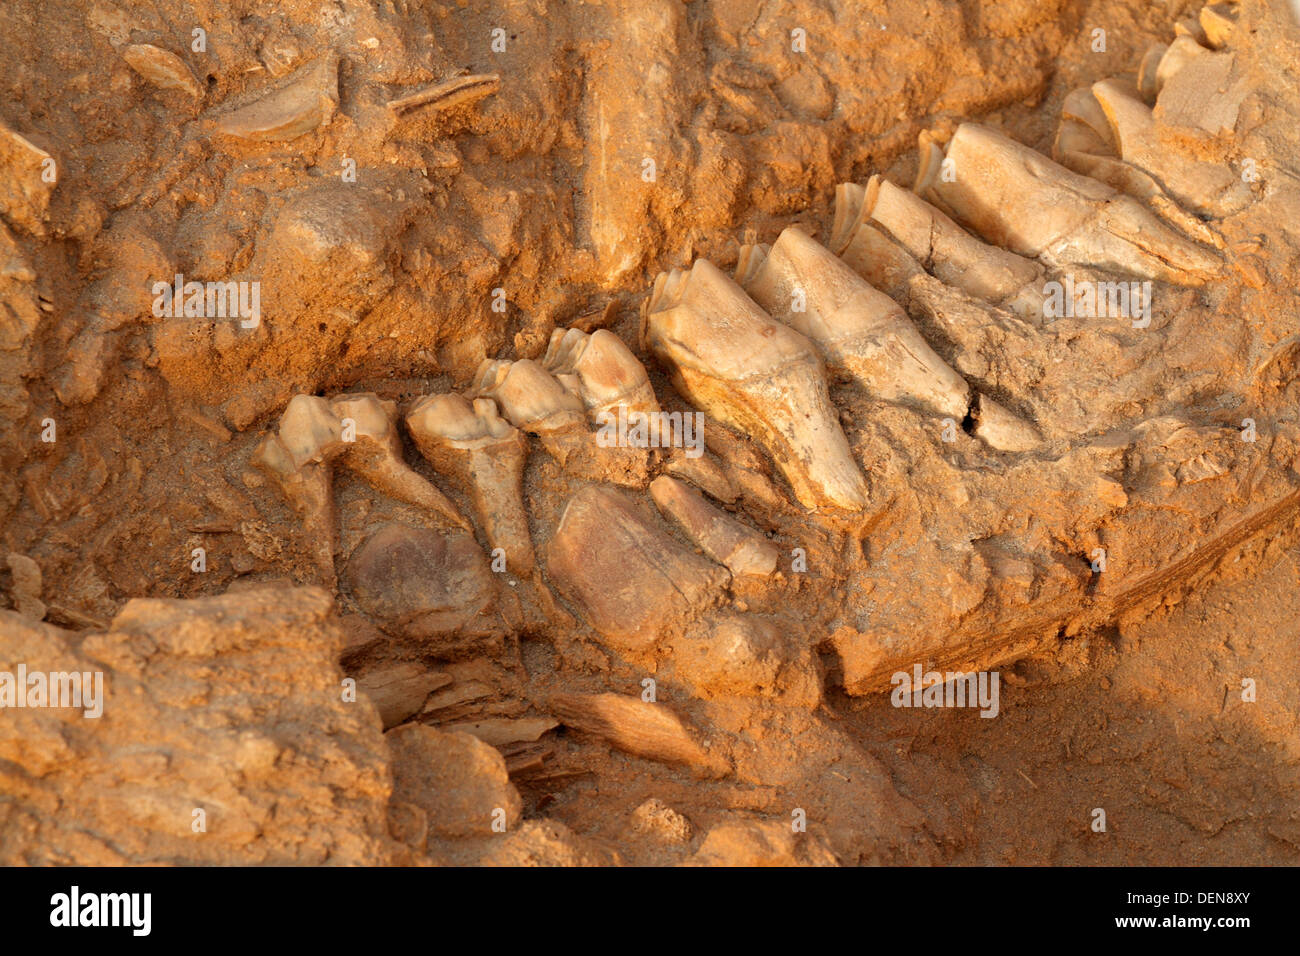 Five million year old fossil jaw bone of an extinct short-necked giraffe, West coast fossil park, South Africa Stock Photo